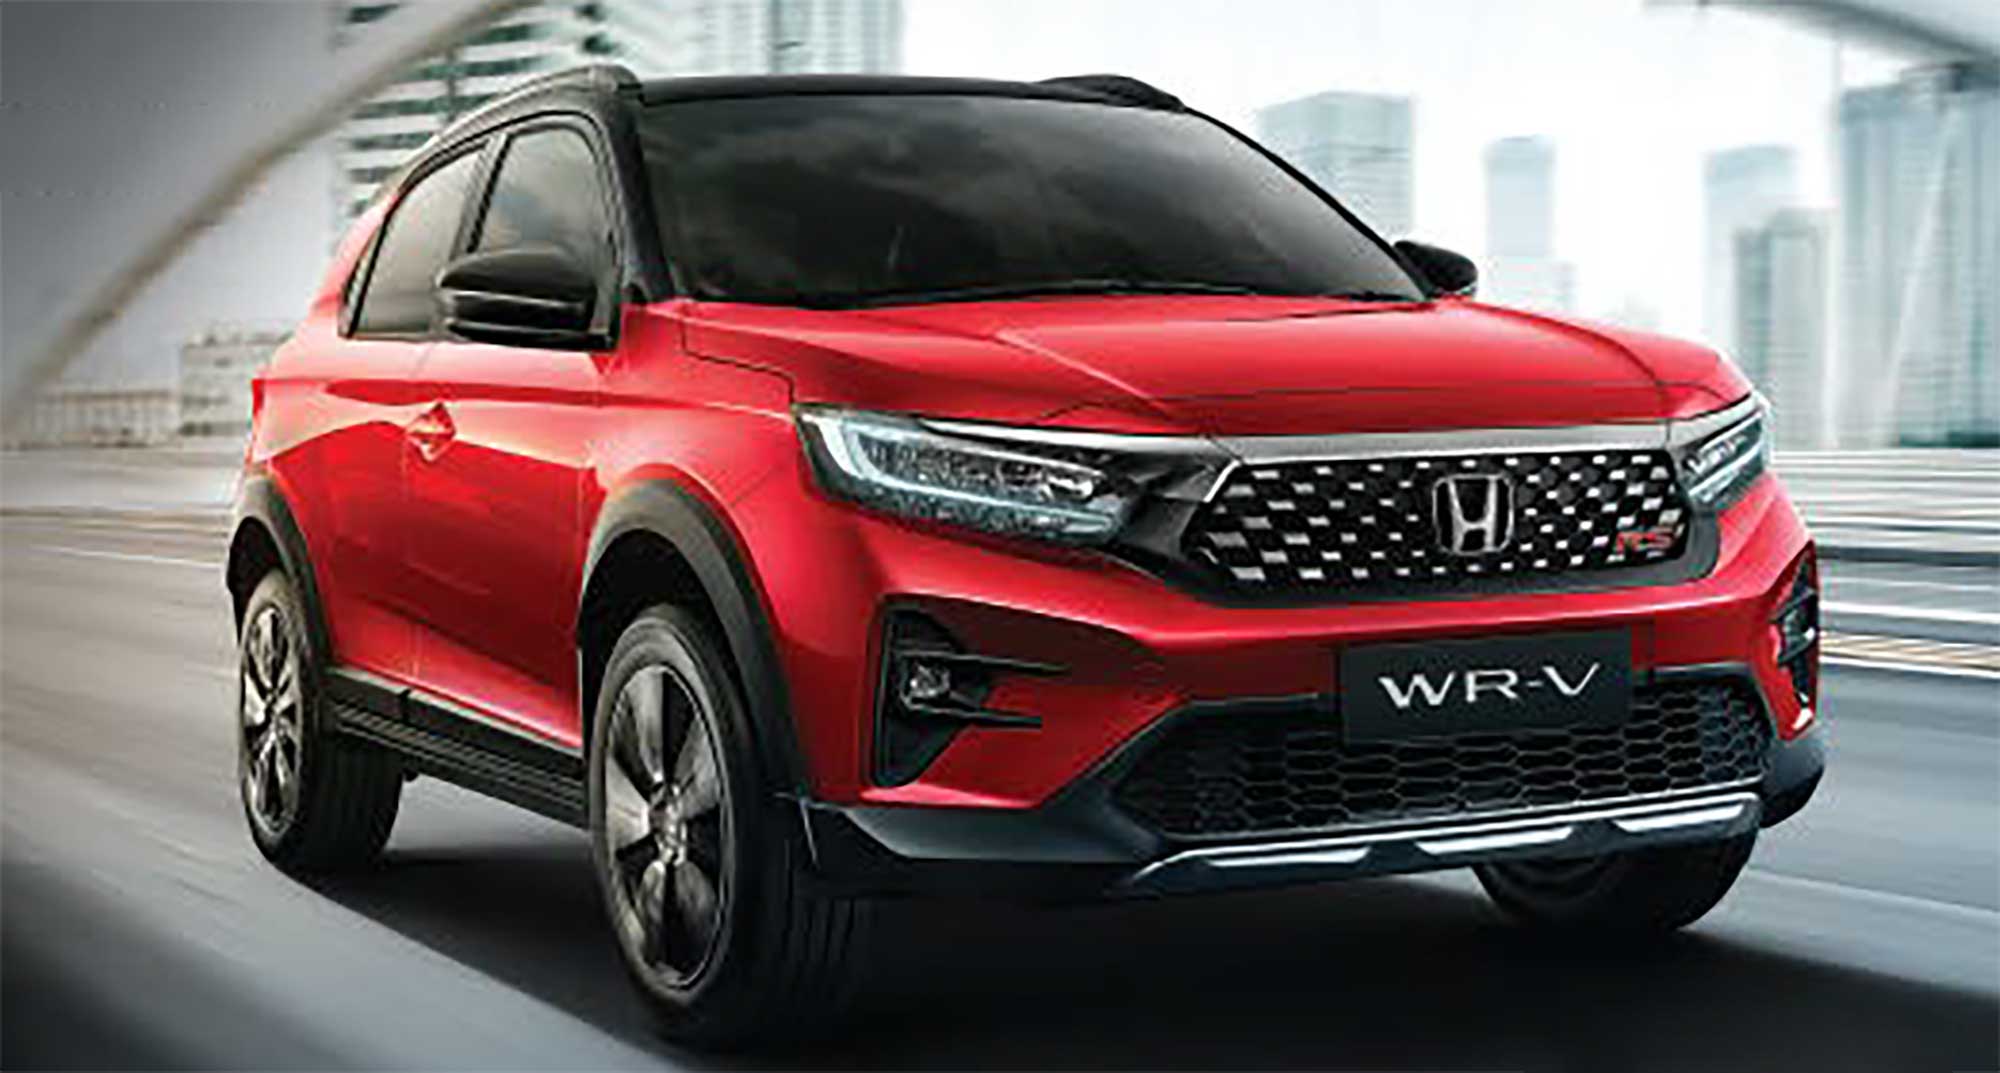 Close-up of the newly launched Honda WR-V, priced from only 446 million